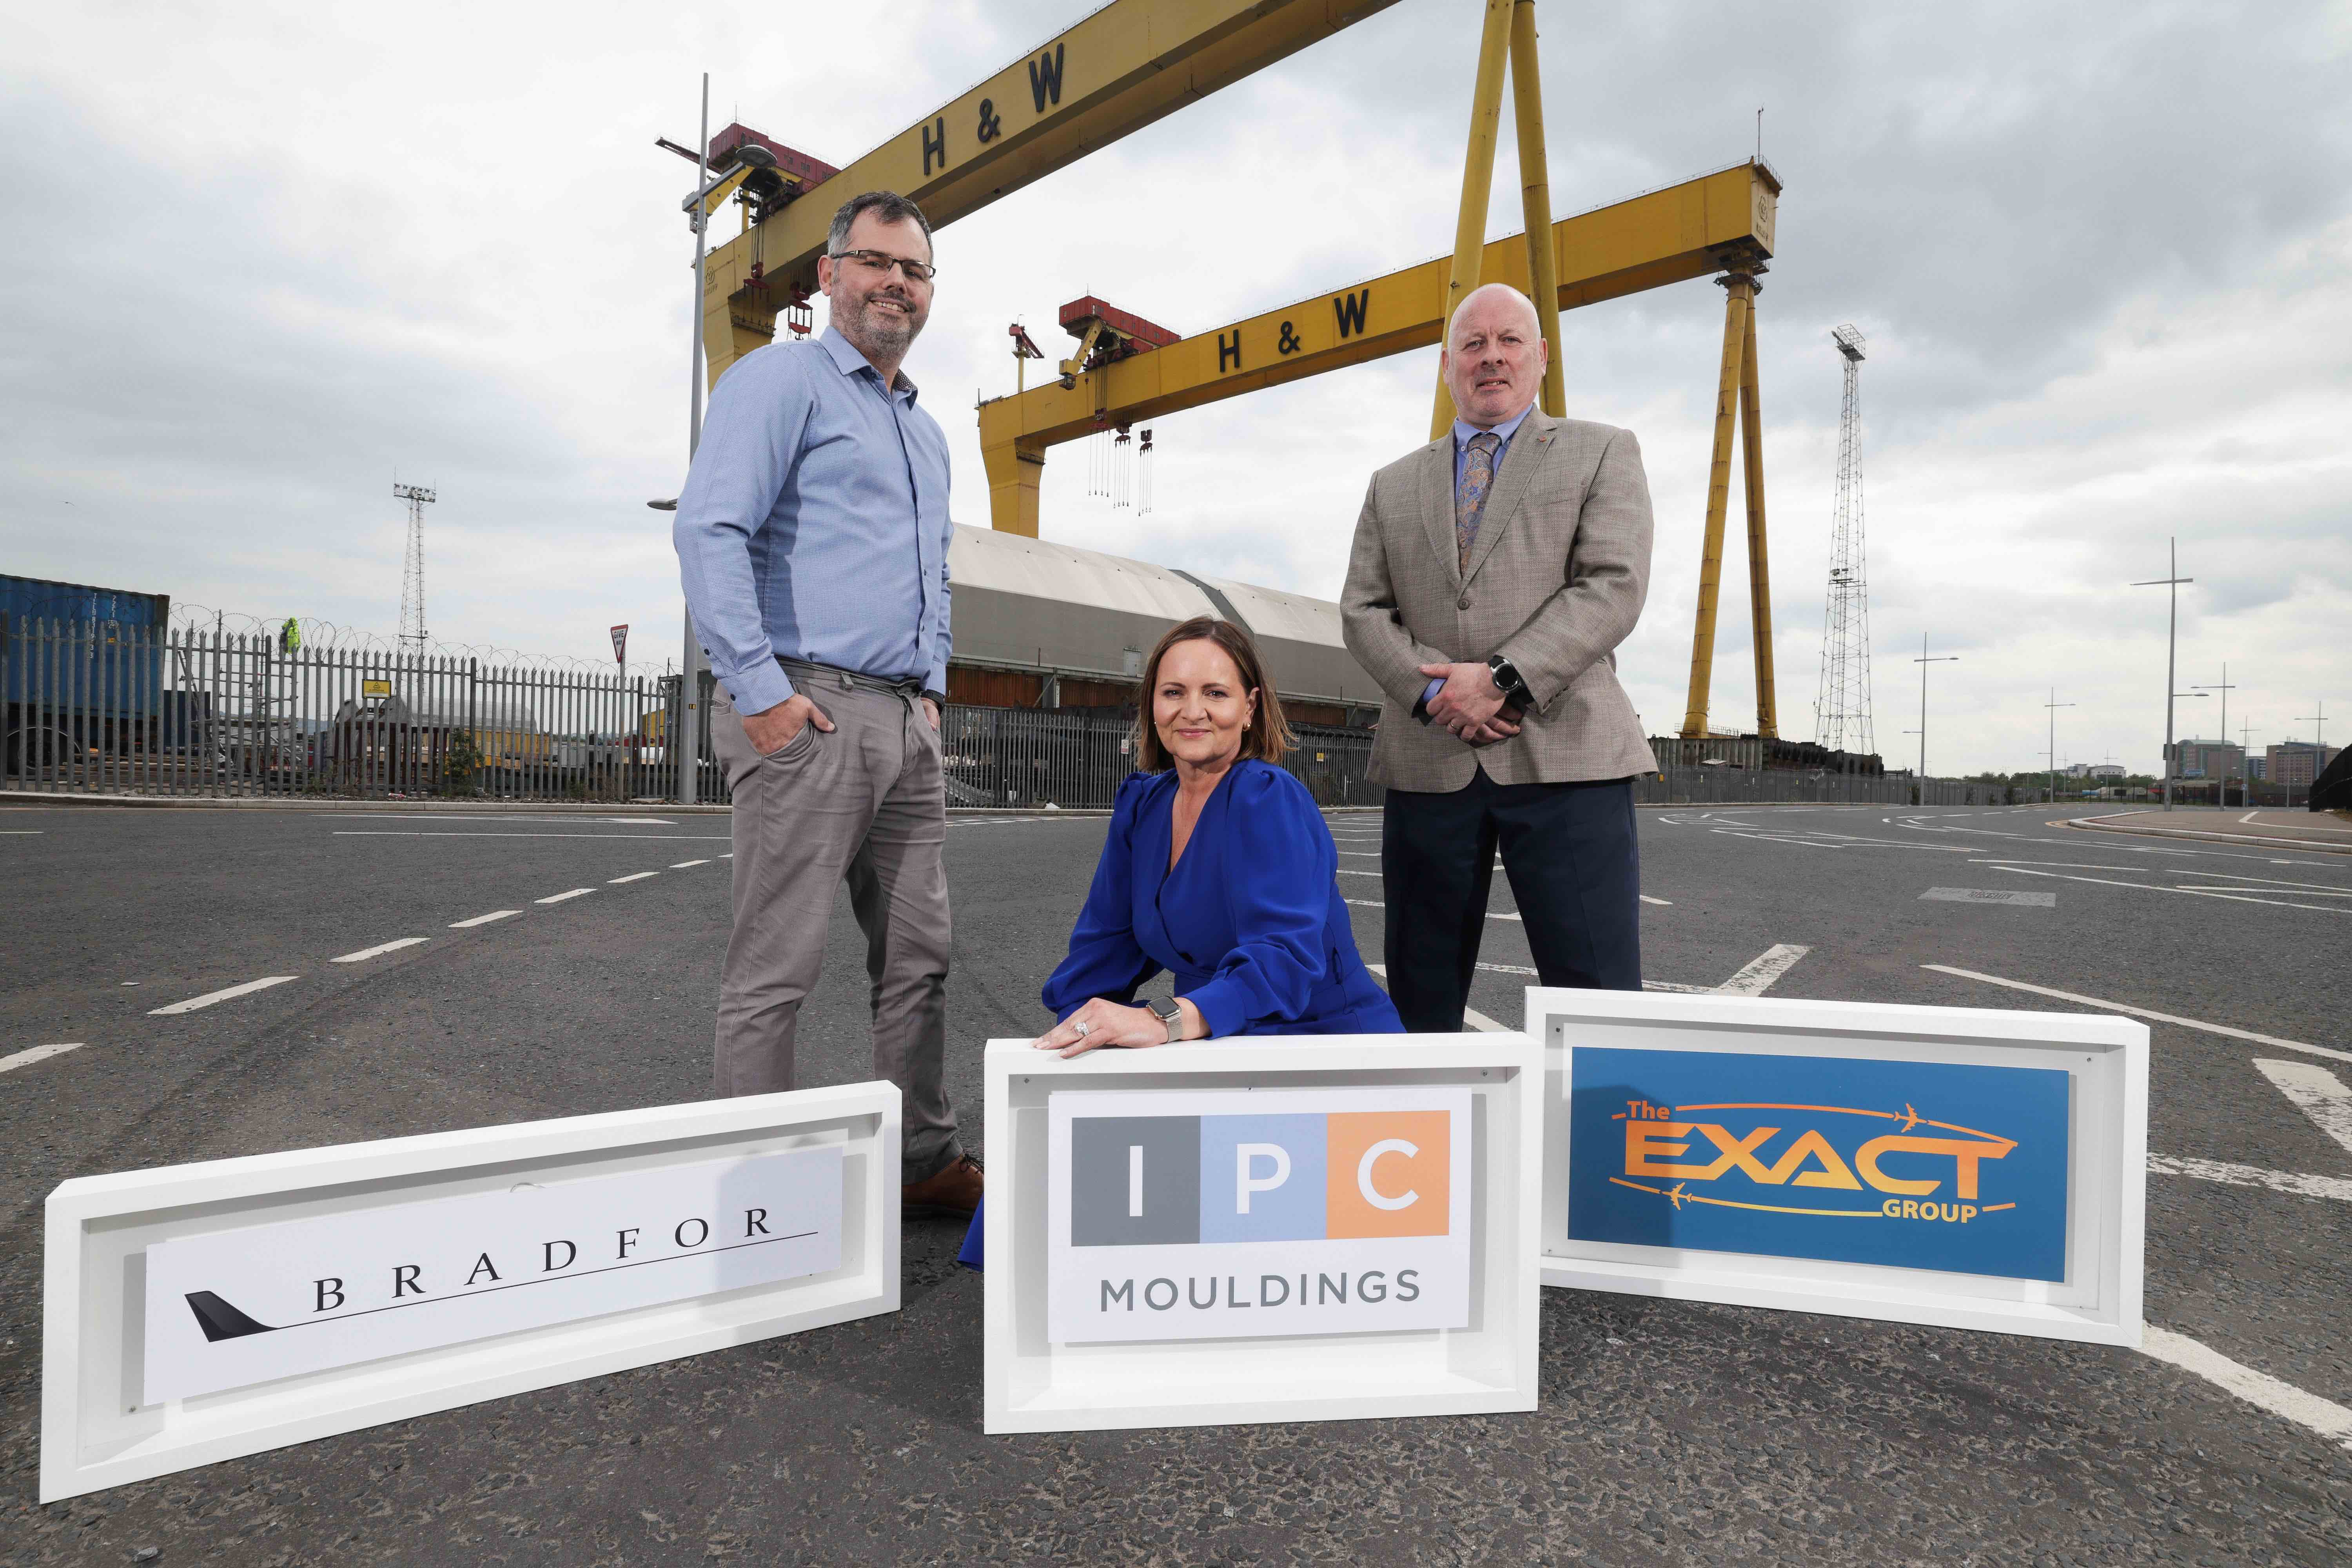 Three Northern Ireland-based companies will be highlighting the epitome of supply chain excellence, and the region’s thriving aerospace manufacturing sector at the Aircraft Interiors Expo in Hamburg later this month. Pictured (L-R) are Francis McCartan, Bradfor Ltd; Joanne Liddle, IPC Mouldings; and Stephen Cromie, The Exact Group.